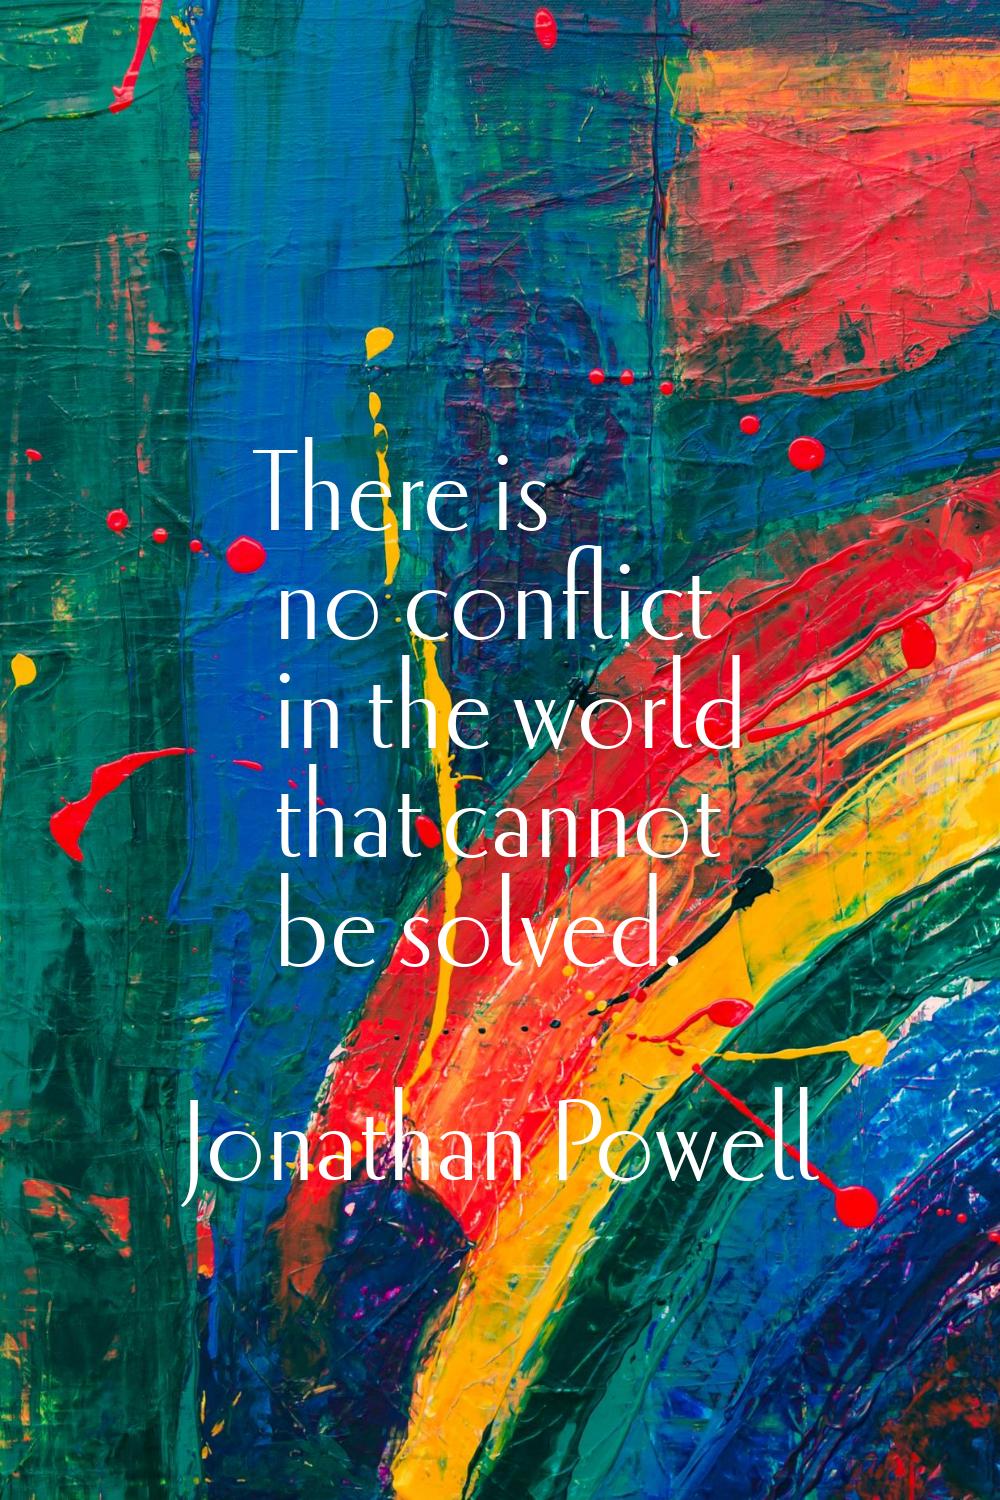 There is no conflict in the world that cannot be solved.